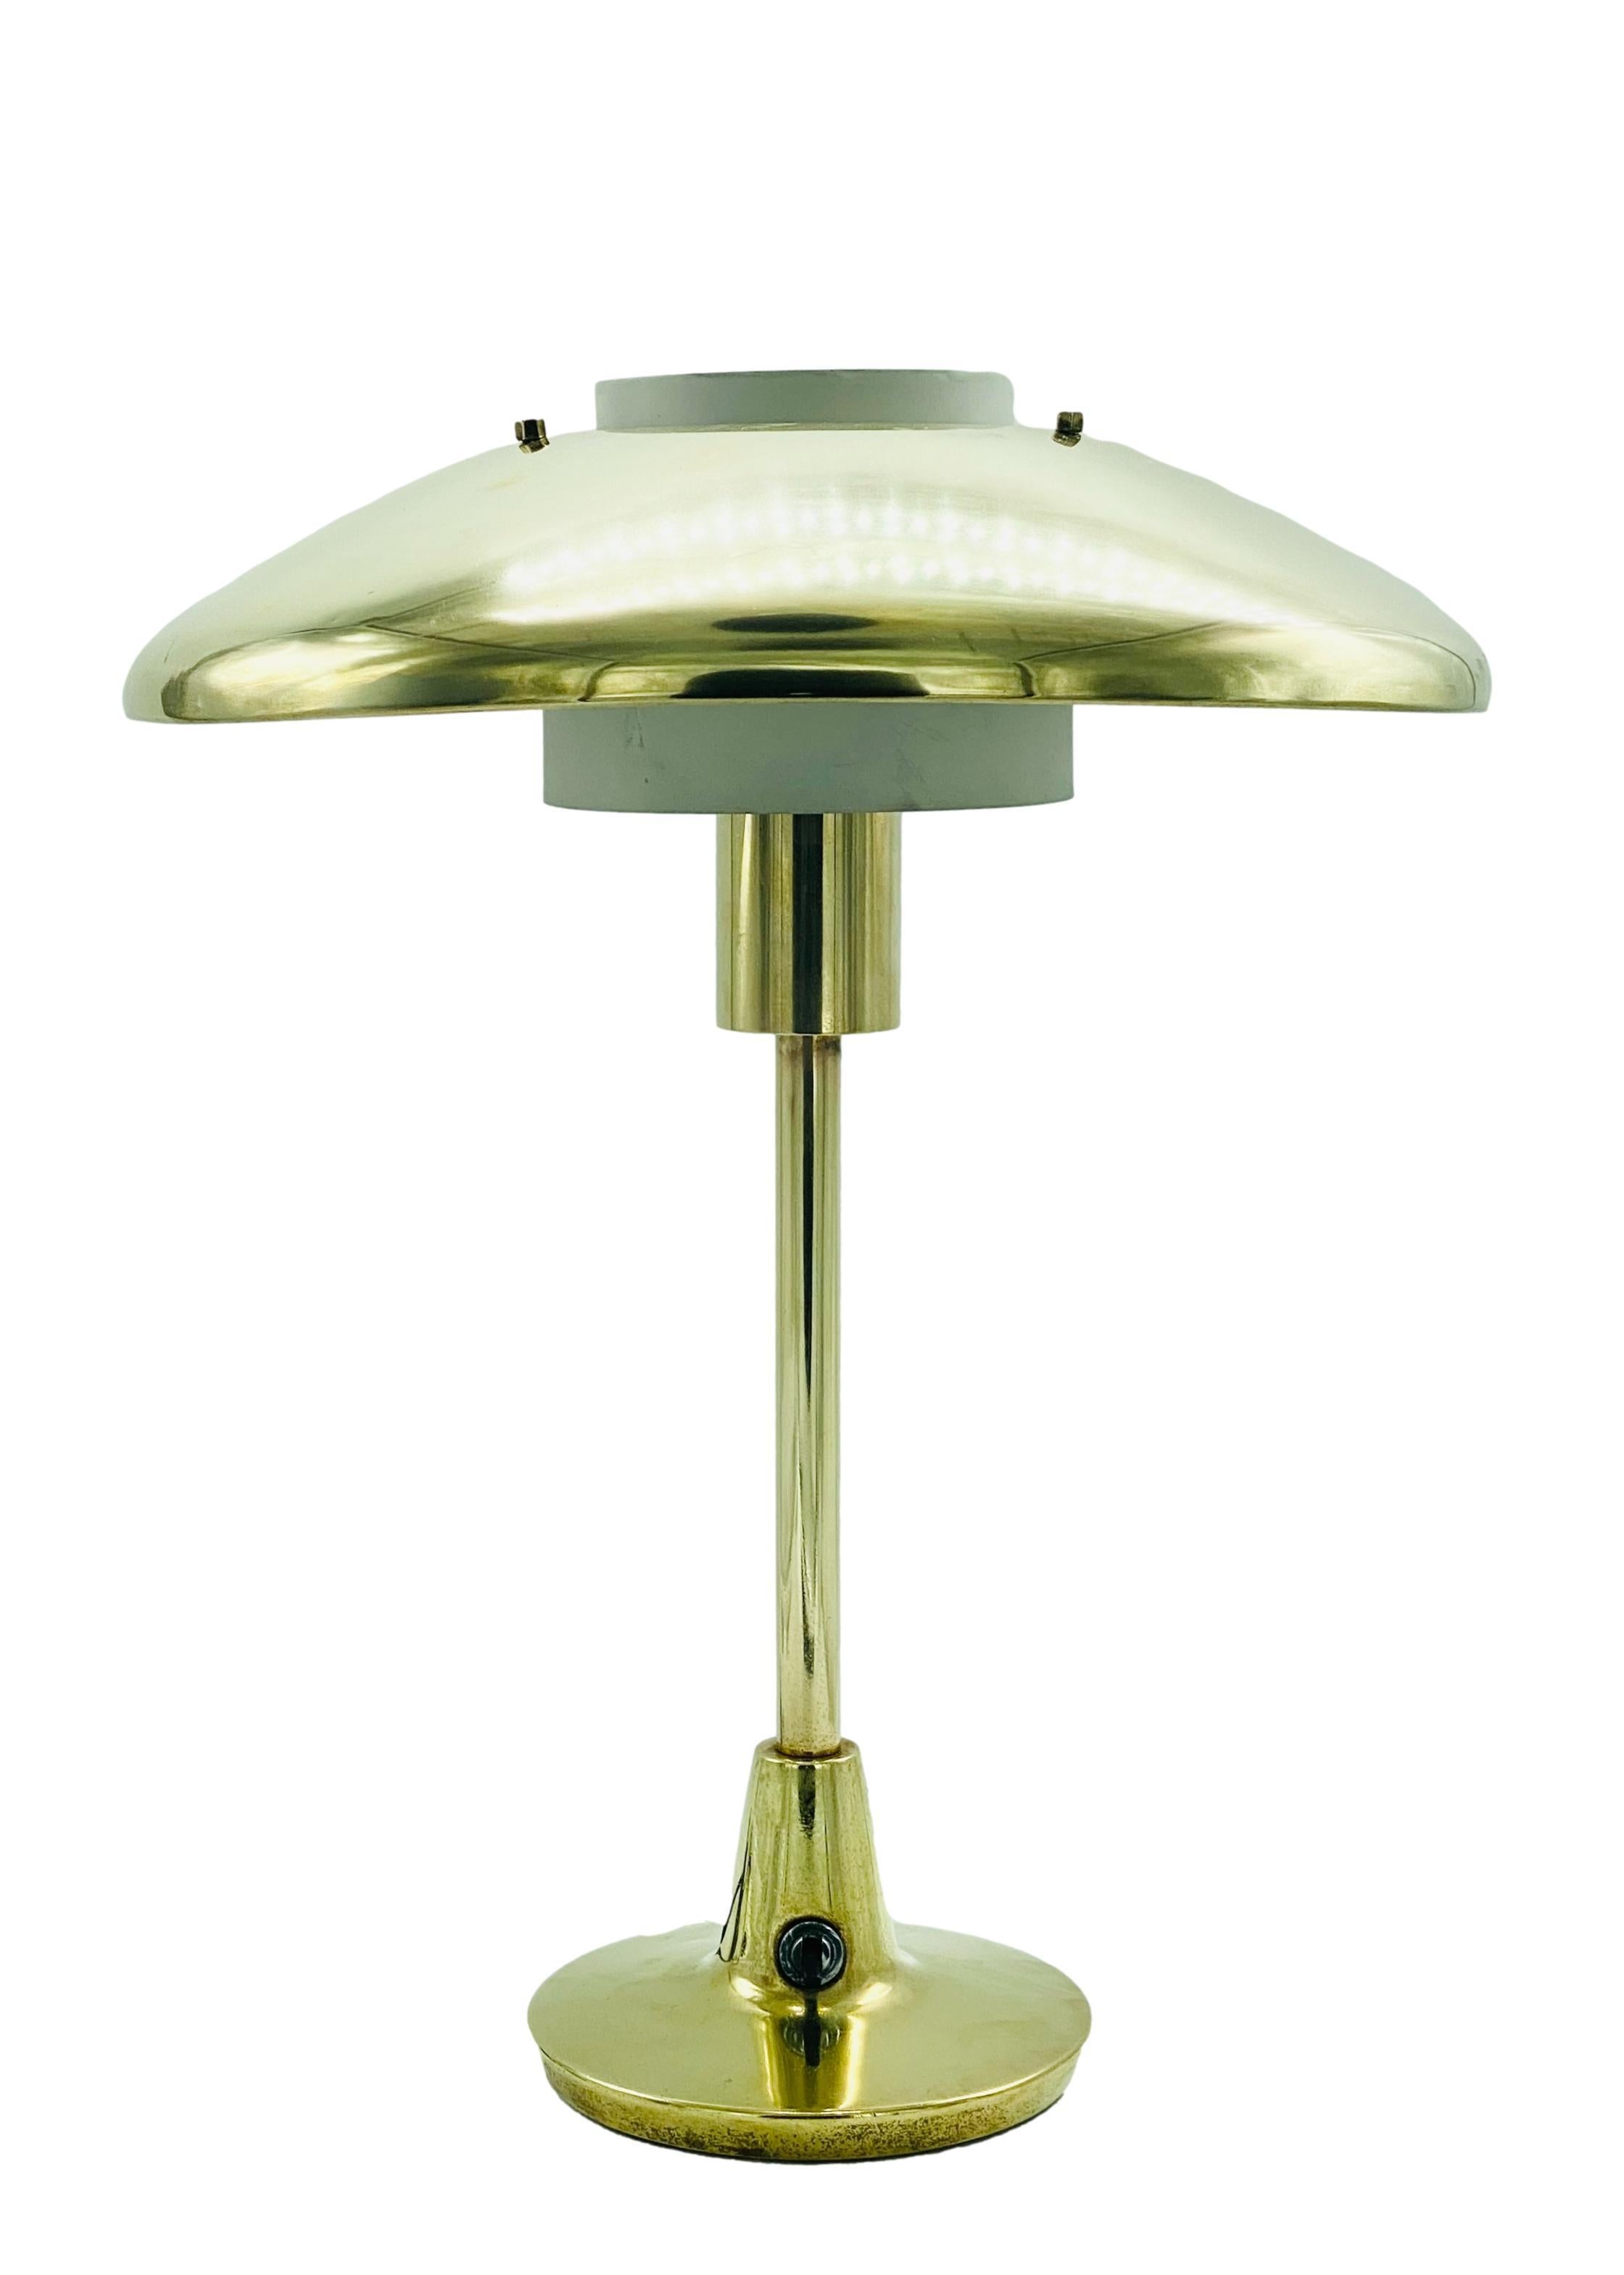 Table lamp mod. 8022 by Stilnovo, Italy, 1960s. Brass, marked with manufacturing label. It is in original condition.